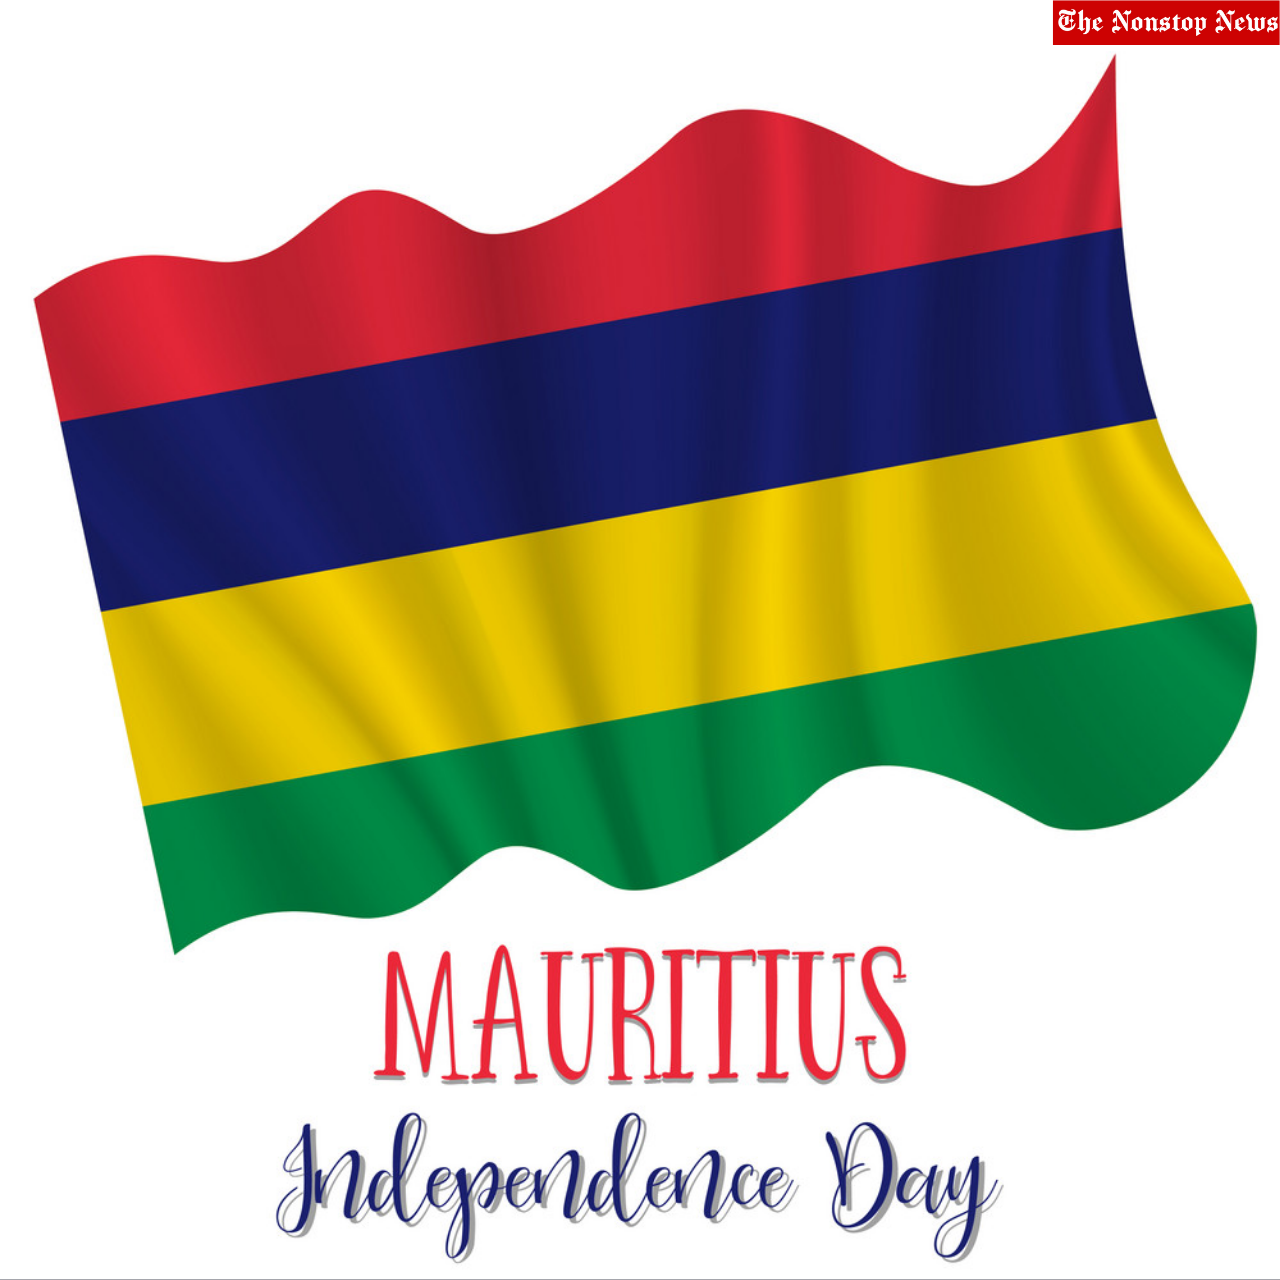 Mauritius Day 2023 Quotes, Images, Wishes, Messages, Greetings, Sayings, Posters, Slogans and Banners